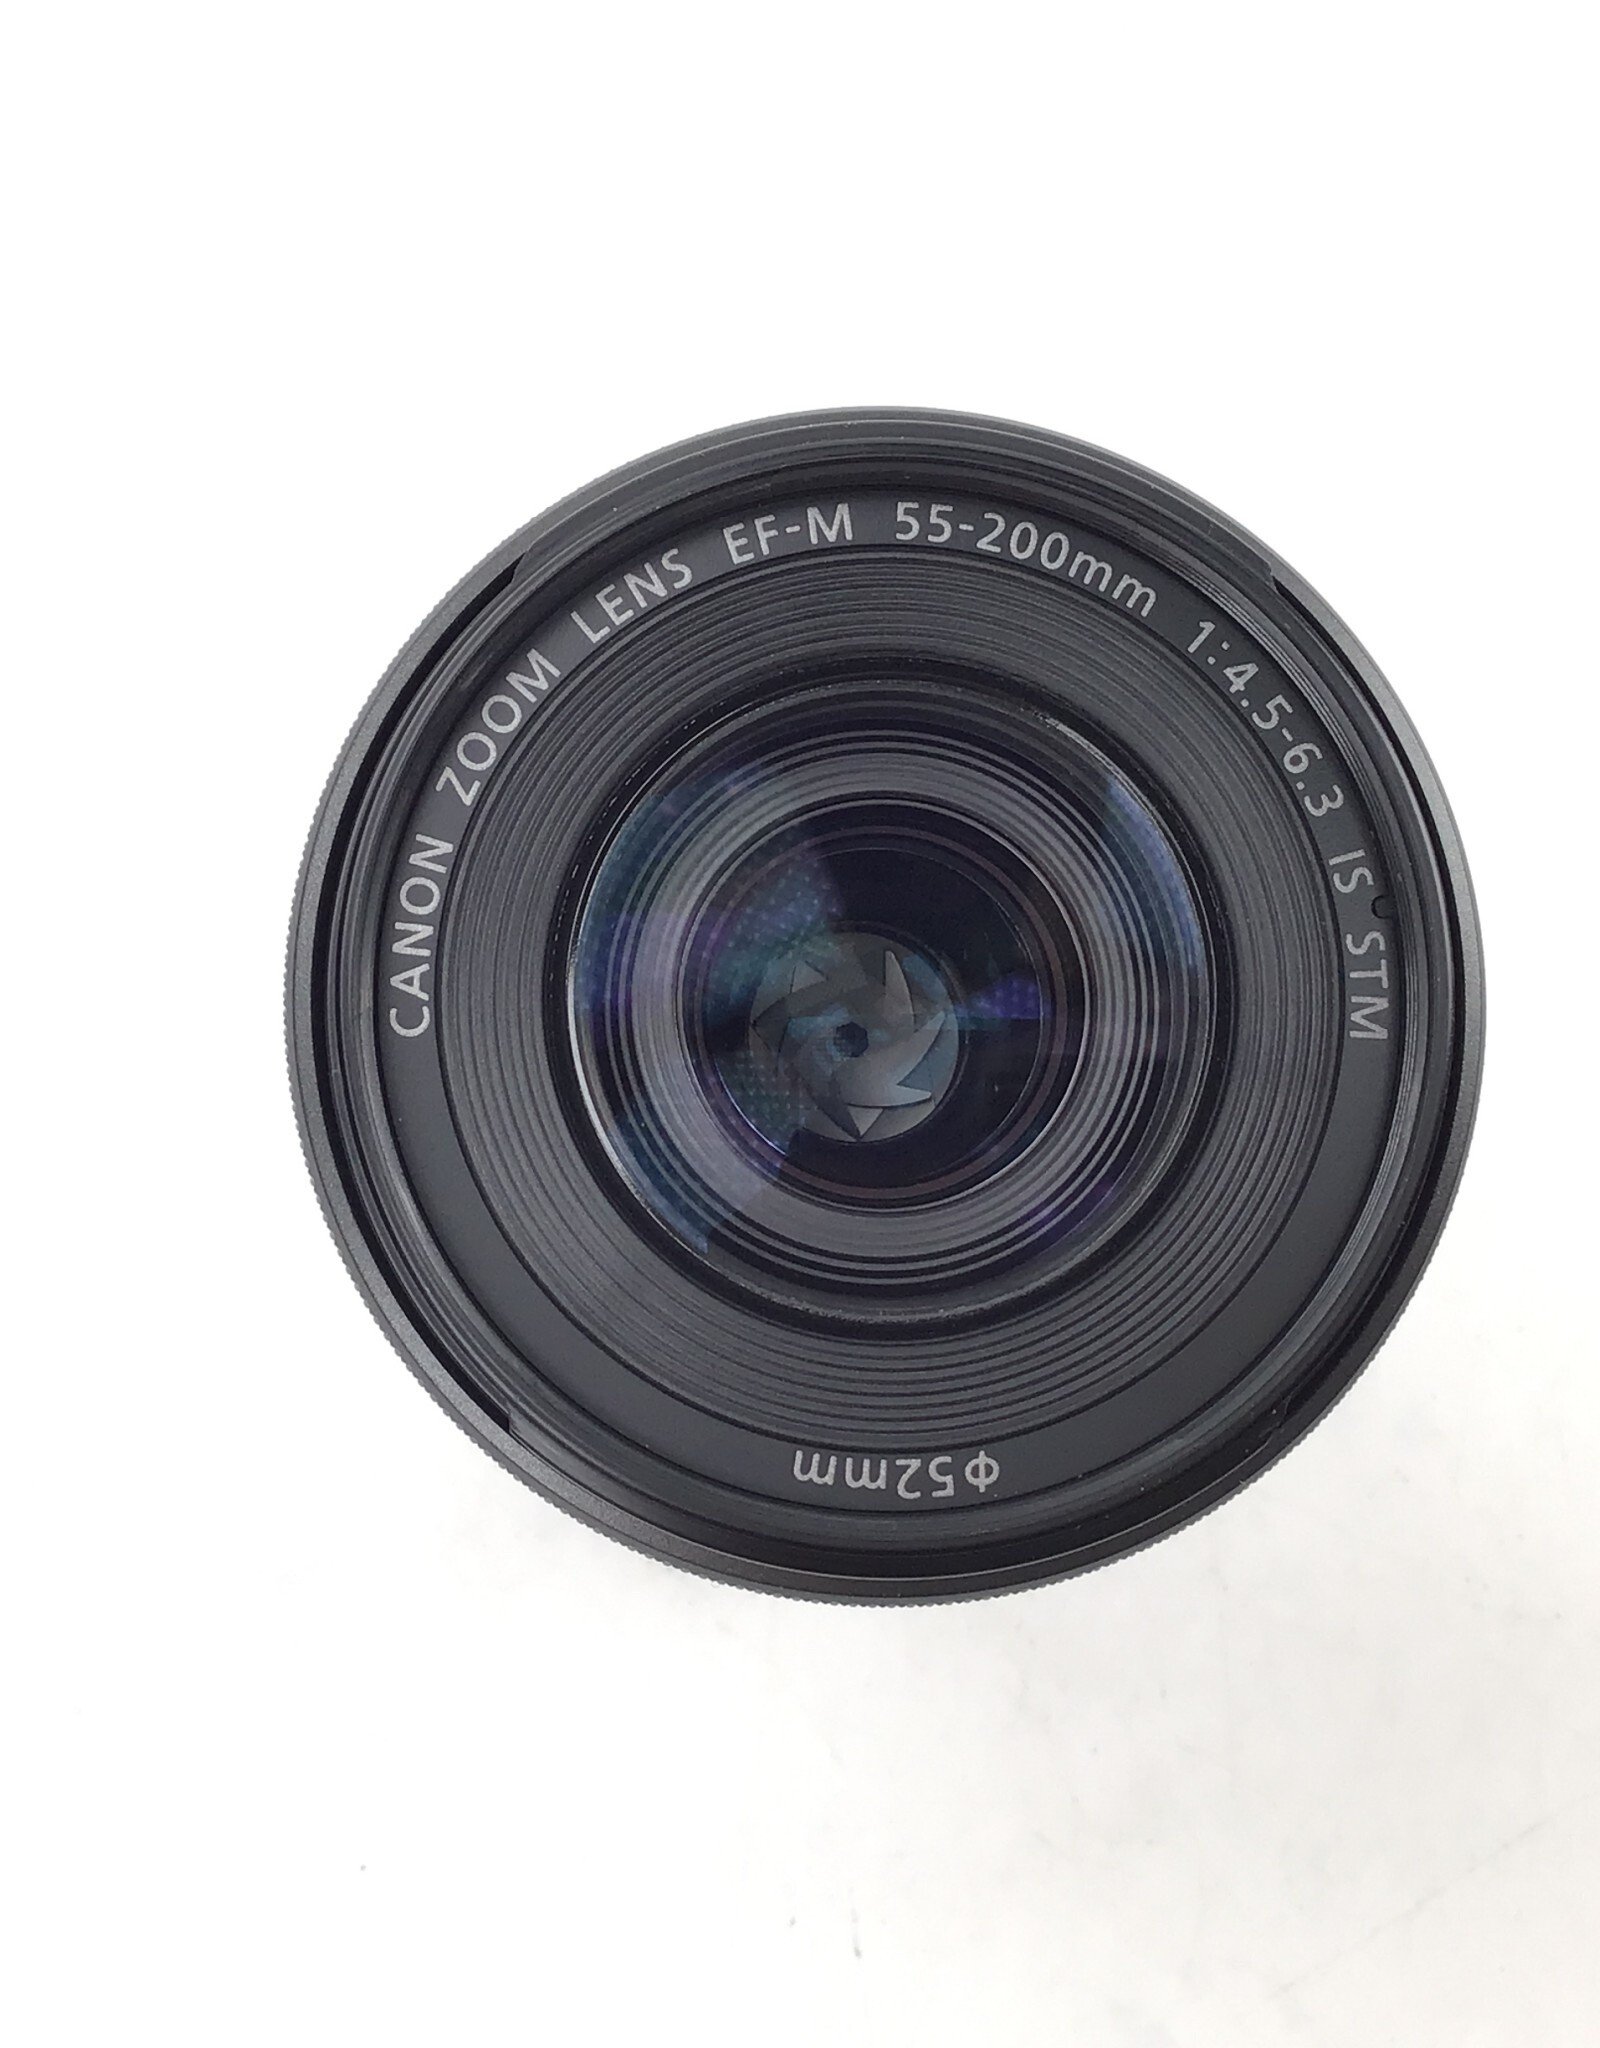 CANON EF-M 55-200mm f4.5-6.3 IS STM 品外観